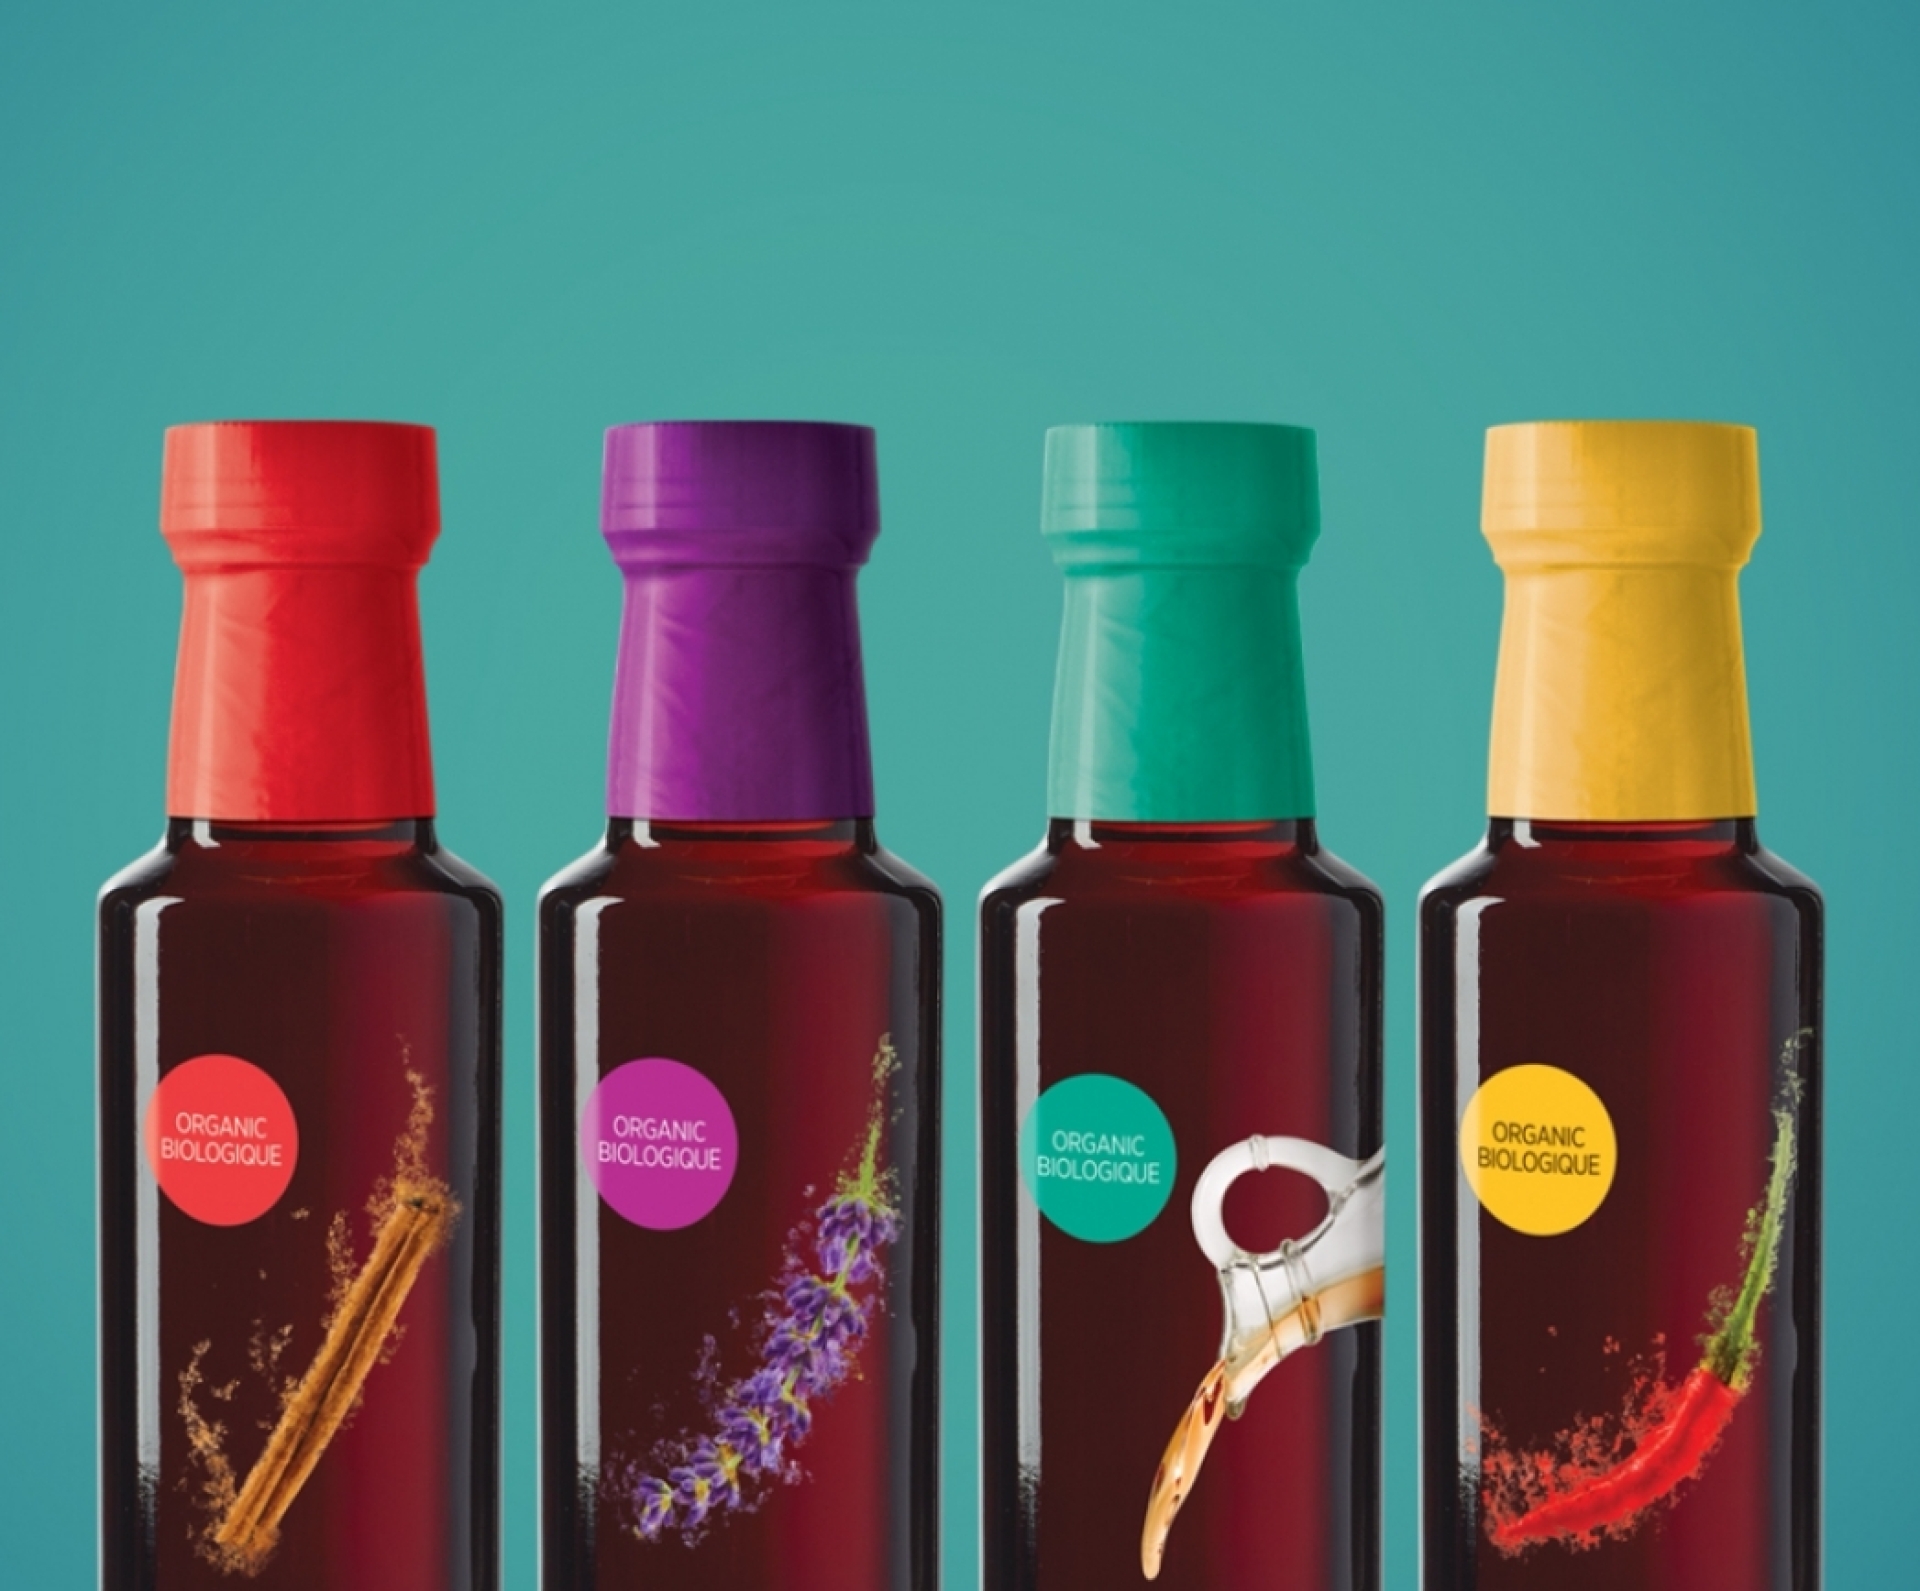 The Hutchinson Acres product packaging design bottles lineup